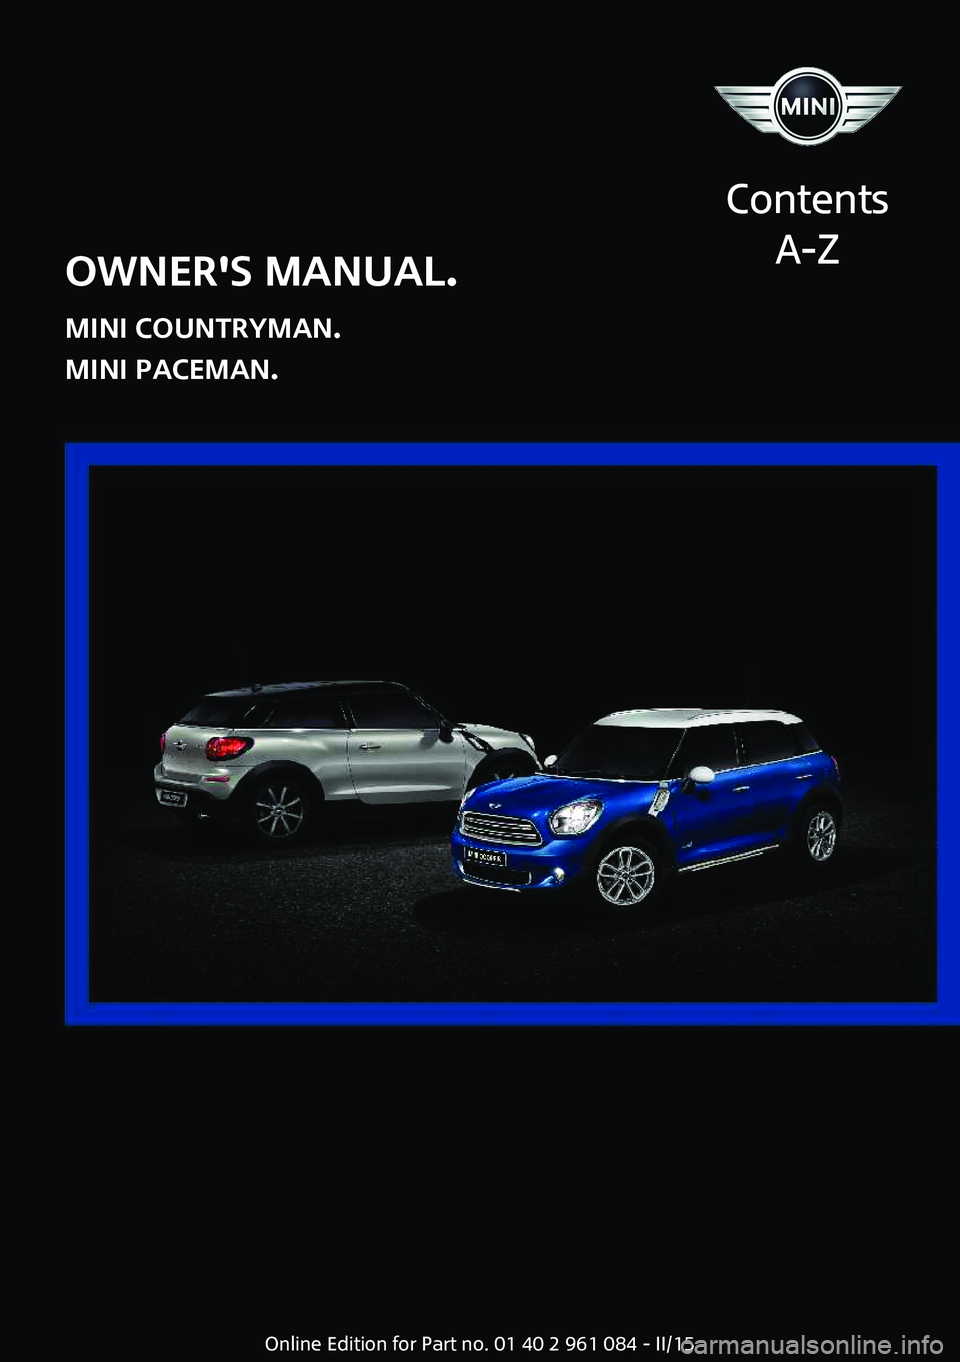 MINI COUNTRYMAN PACEMAN 2015  Owners Manual OWNER'S MANUAL.
MINI COUNTRYMAN.
MINI PACEMAN.
Contents
A-ZOnline Edition for Part no. 01 40 2 961 084 - II/15  